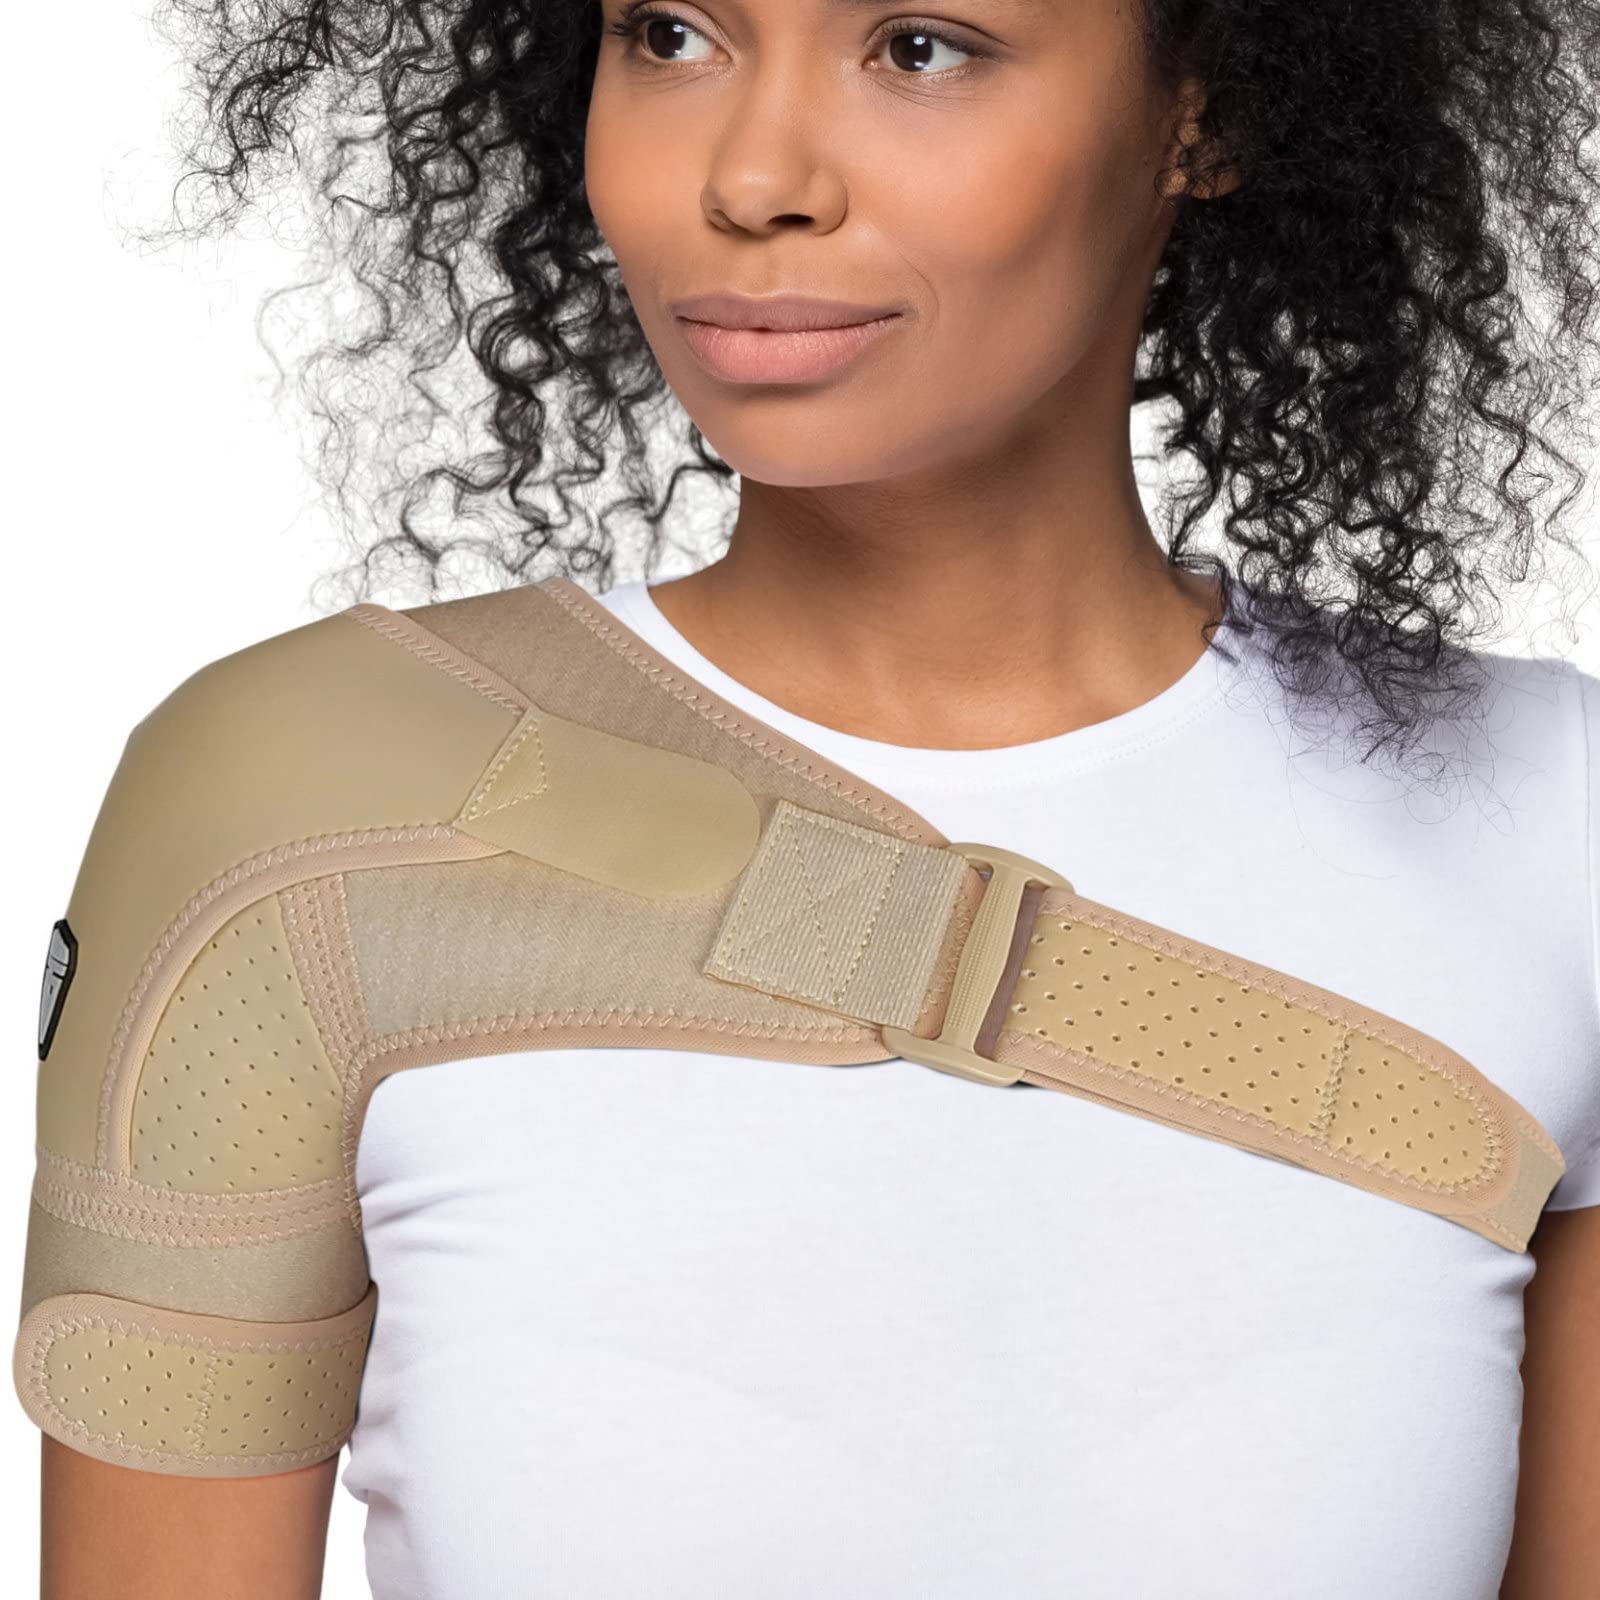 Compression Recovery Support Right Shoulder Stability Brace, Arm